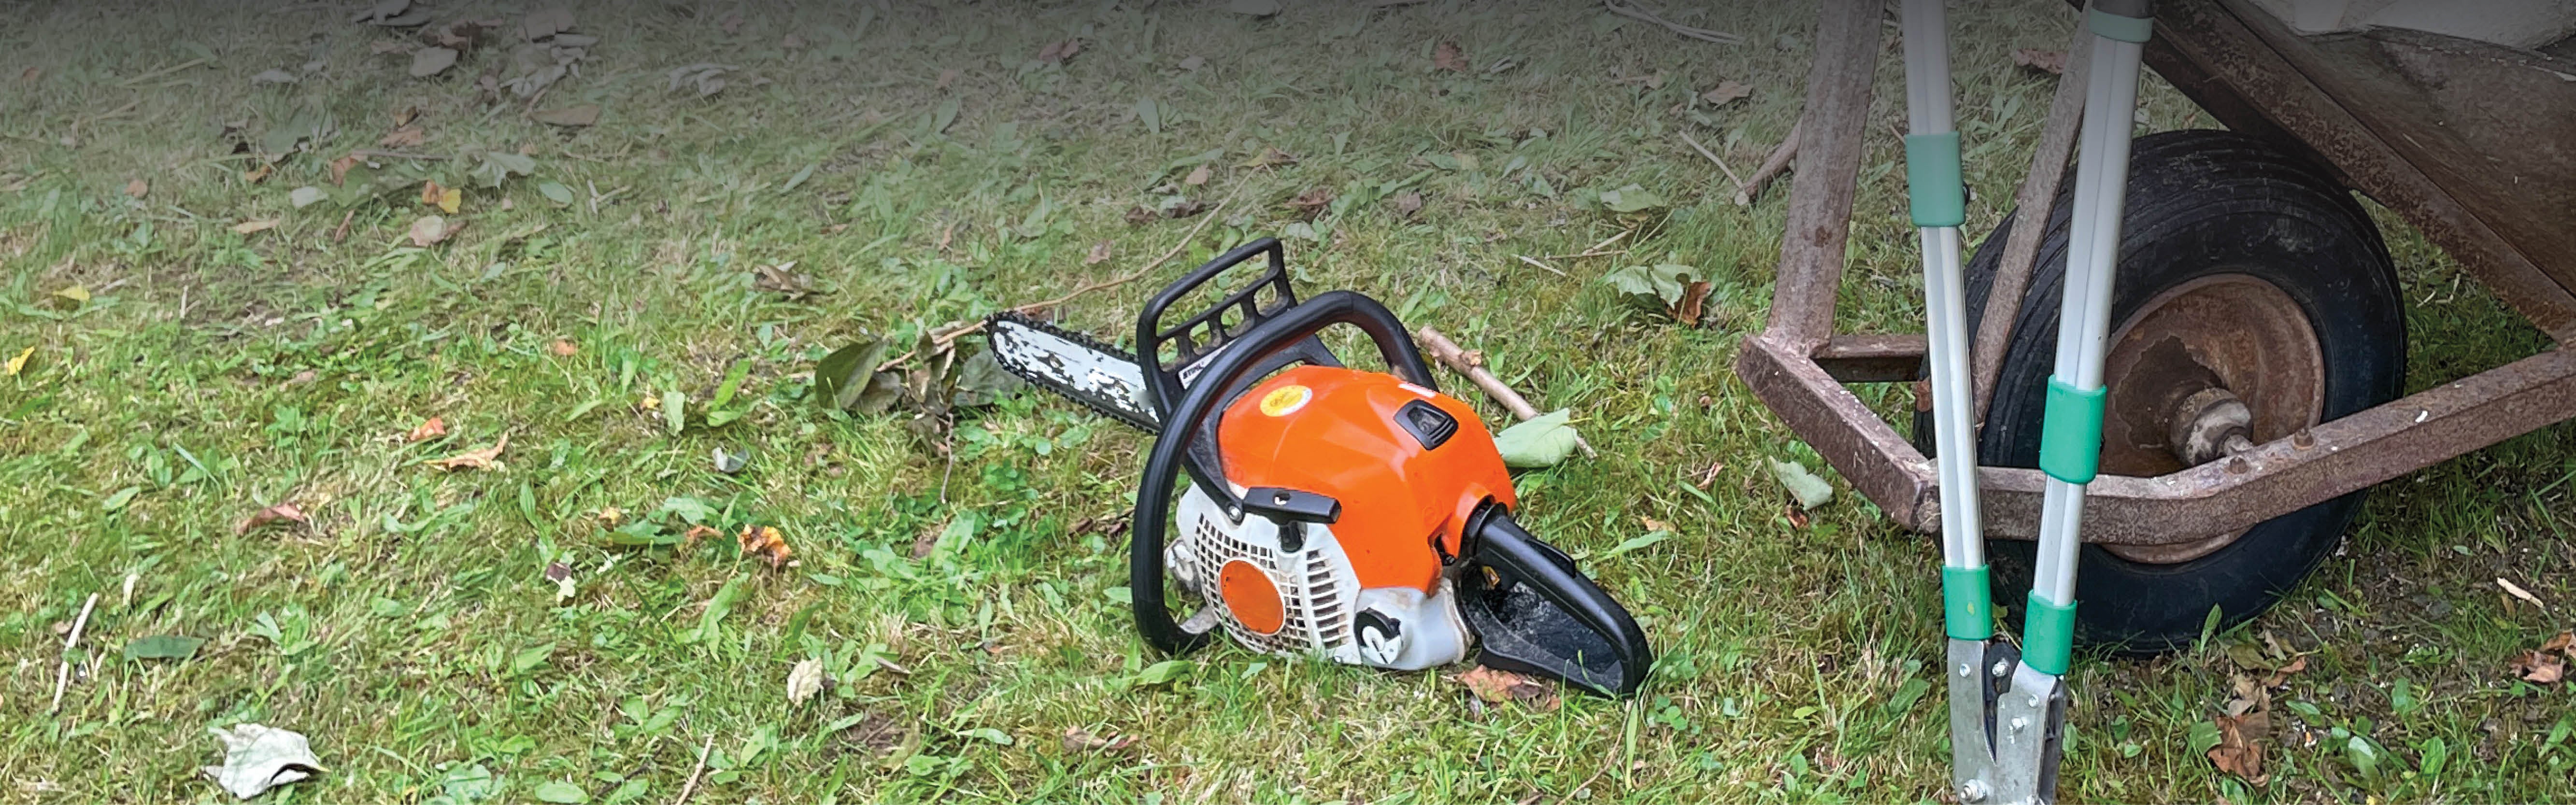 A chainsaw sits in the grass ready to be used to cut wood.